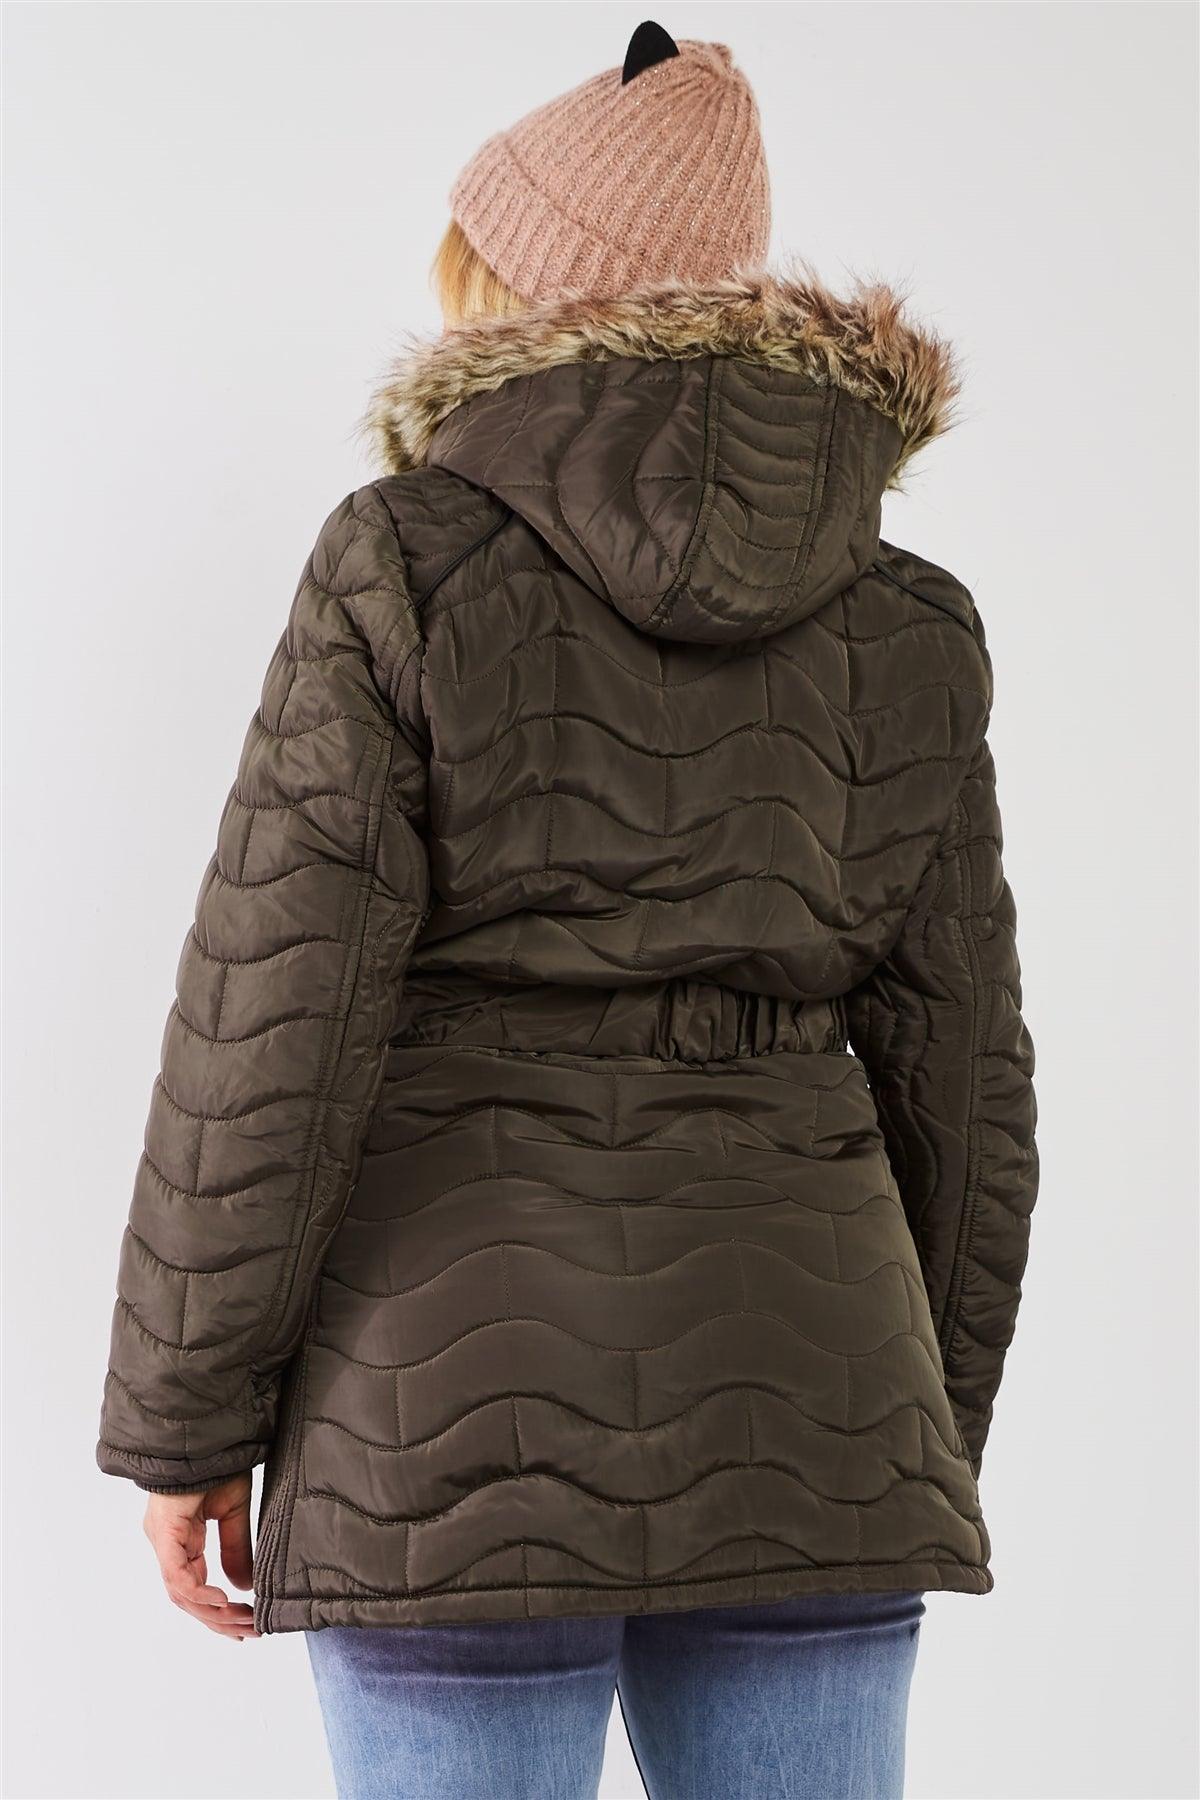 Junior Plus Olive Wavy Brick Quilt Faux Fur Hood Belted Padded Long Puffer Jacket /1-1-1-1